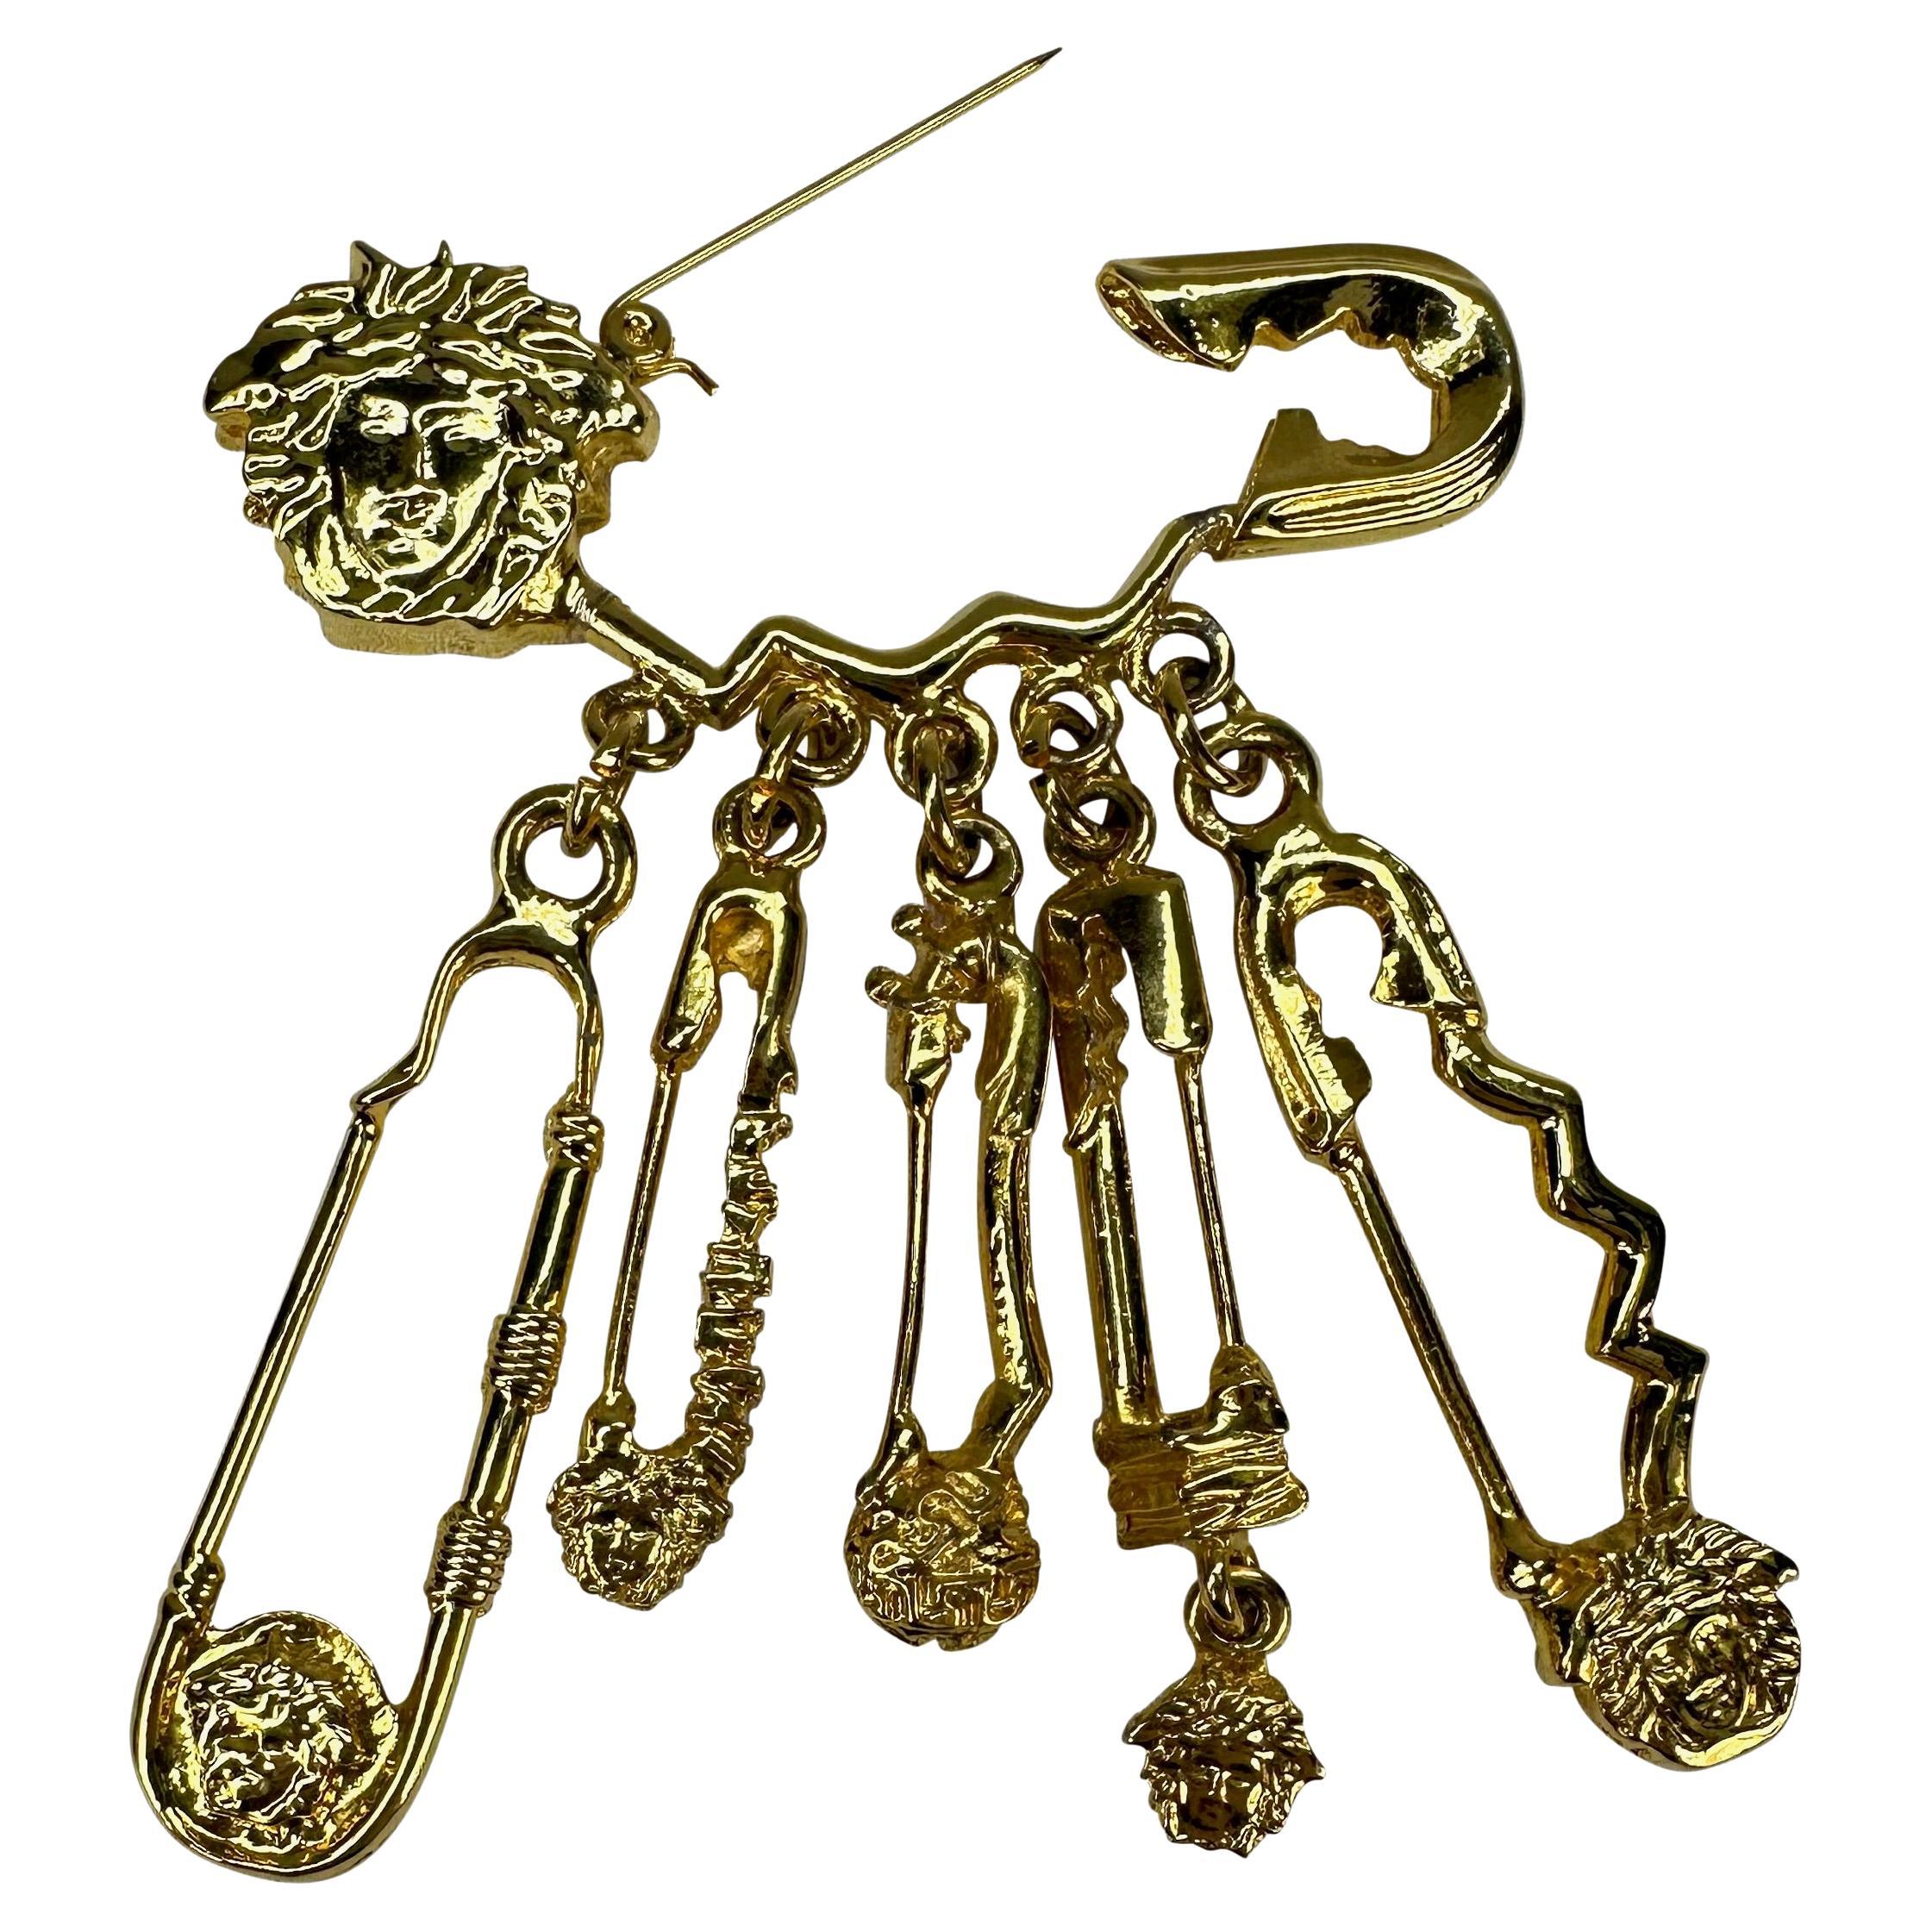 Presenting an incredible gold-tone Gianni Versace Medusa safety pin brooch, designed by Gianni Versace. From the Spring/Summer 1994 collection, this oversized safety pin brooch is covered in Versace Medusa logos and is made complete with five